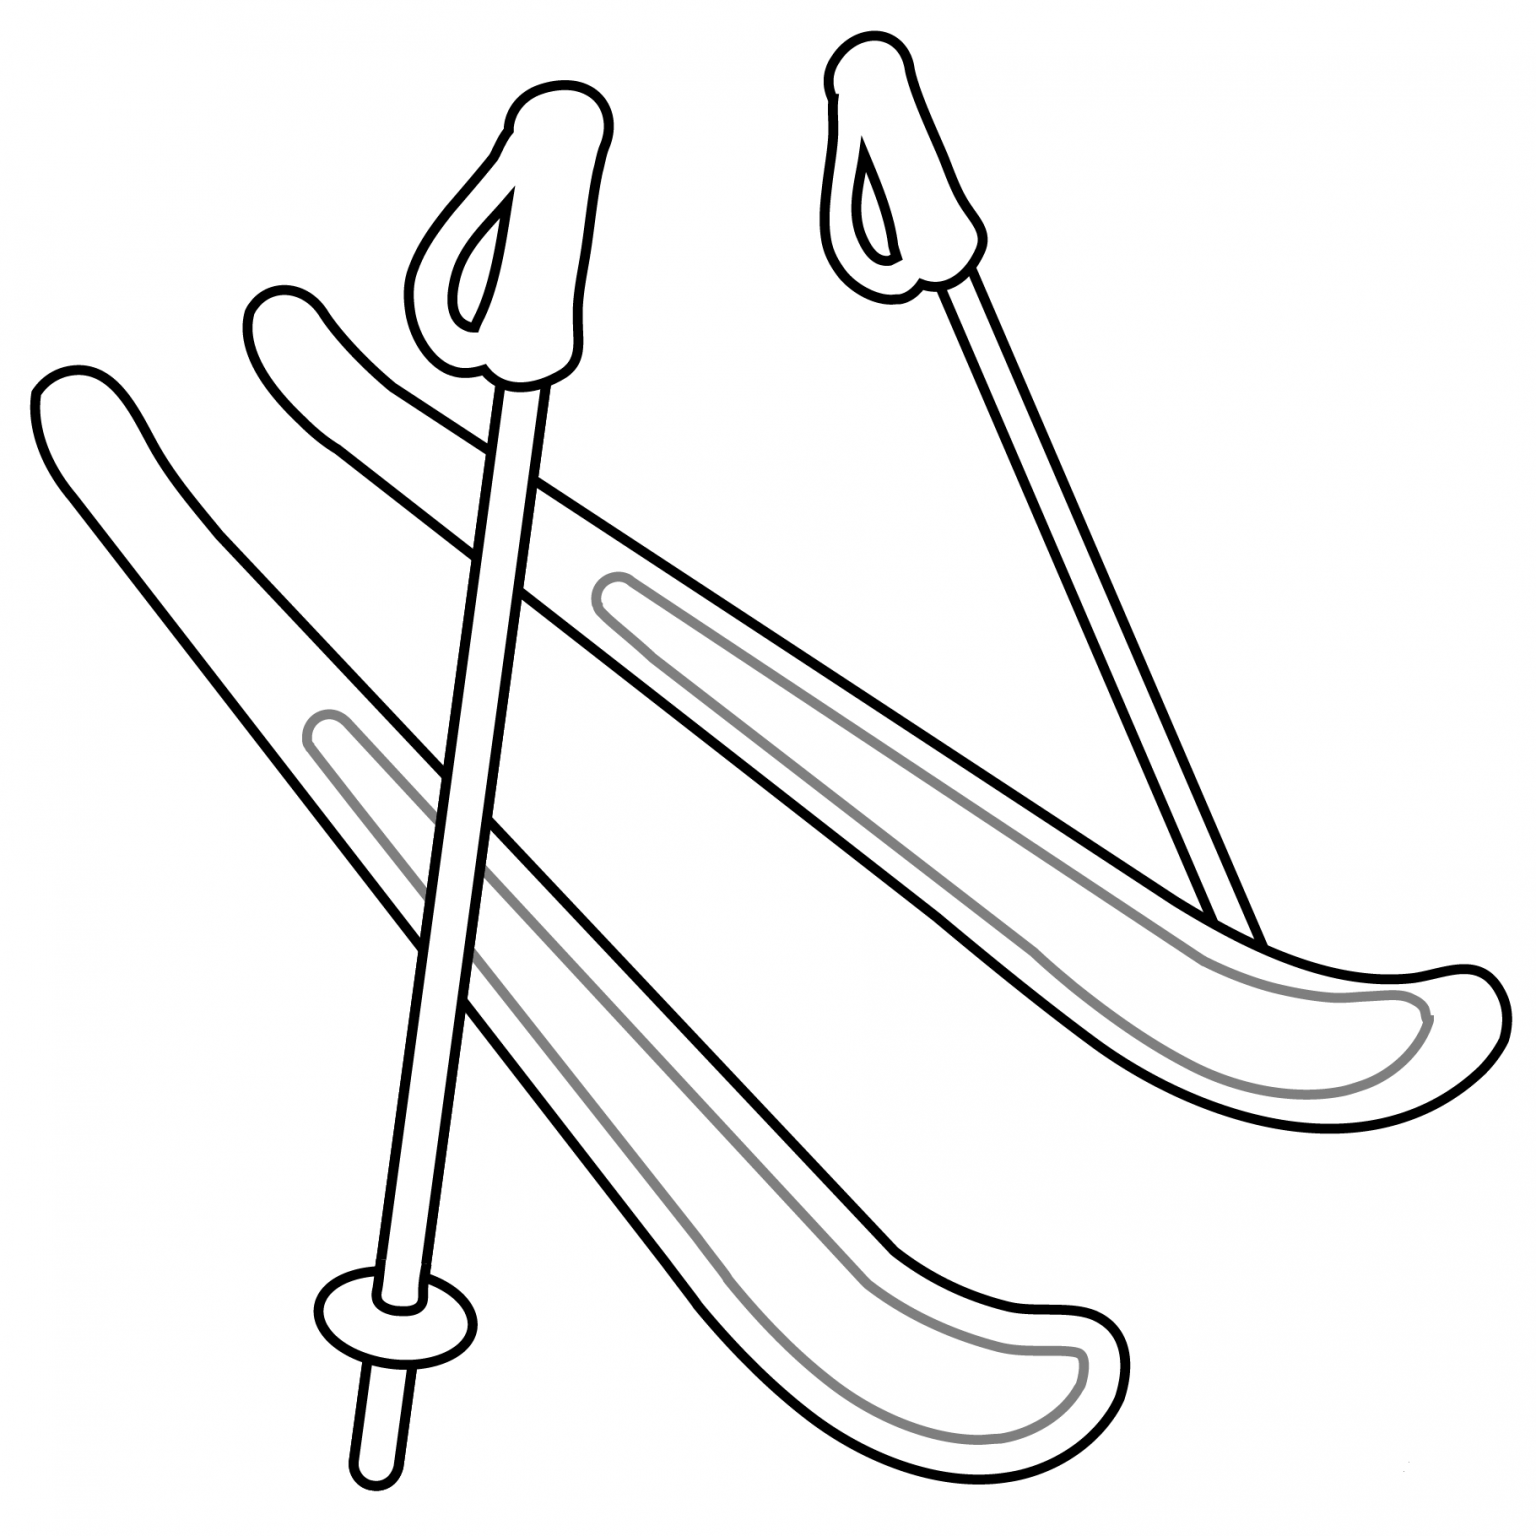 Skis Emoji coloring page - ColouringPages